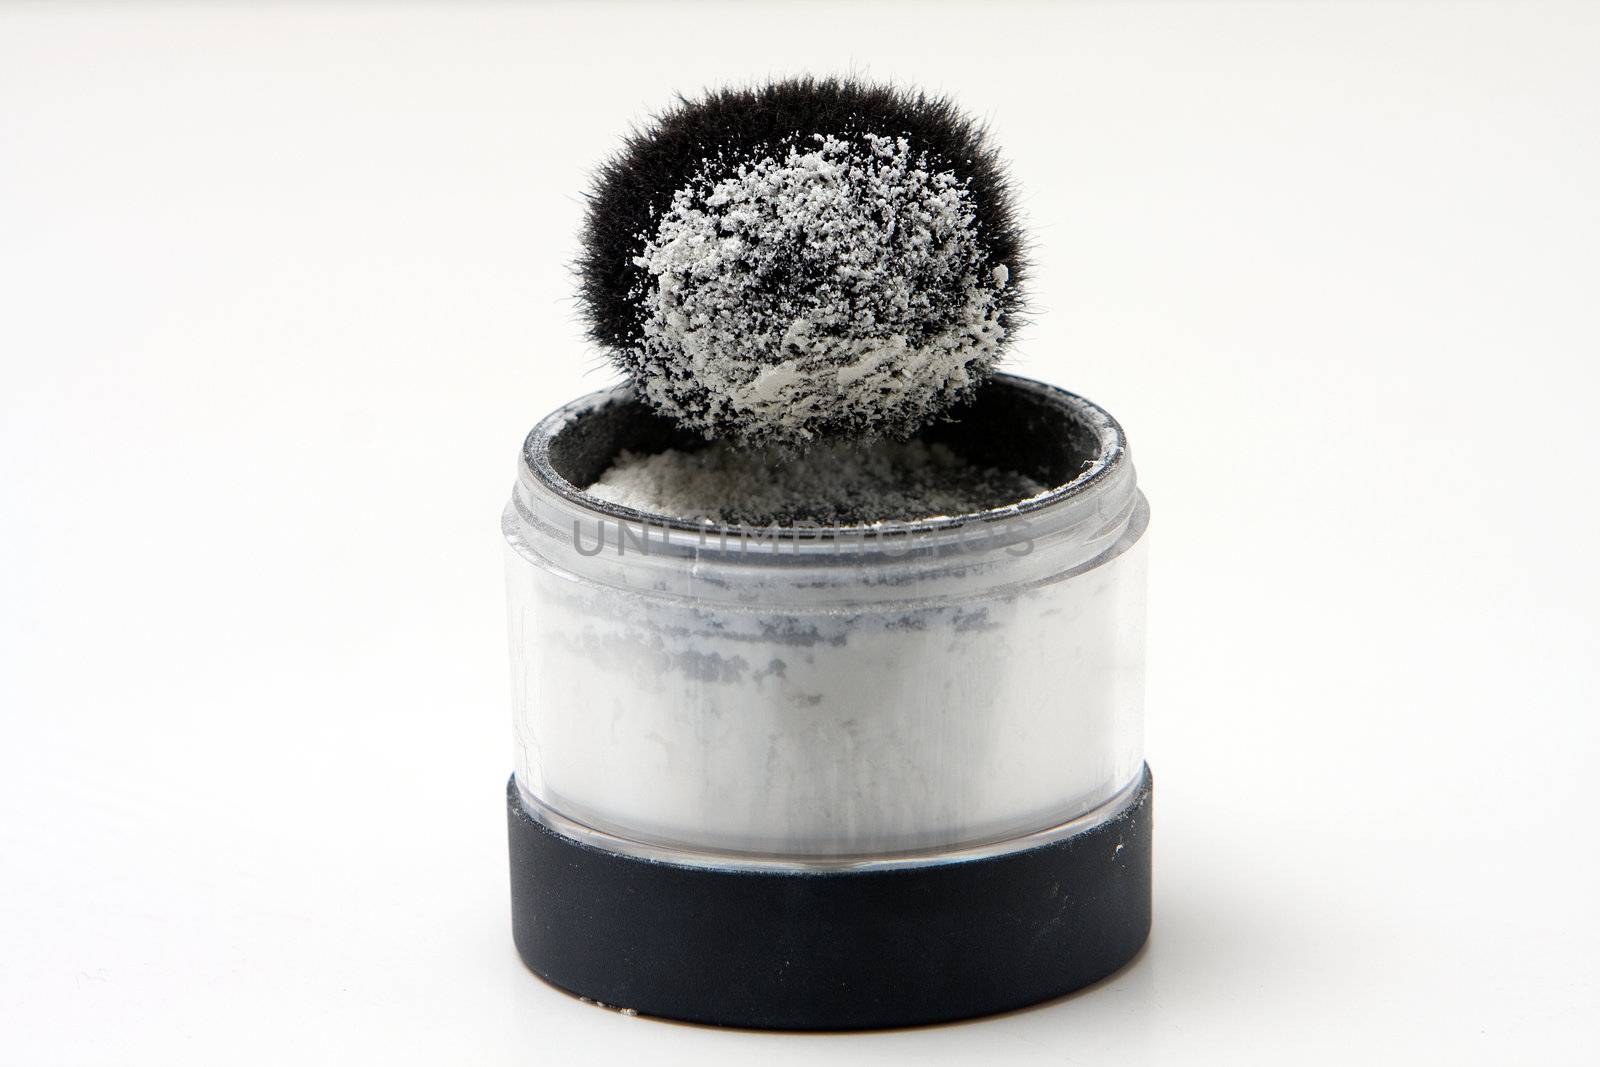 Translucent white powder in a jar and on brush, isolated